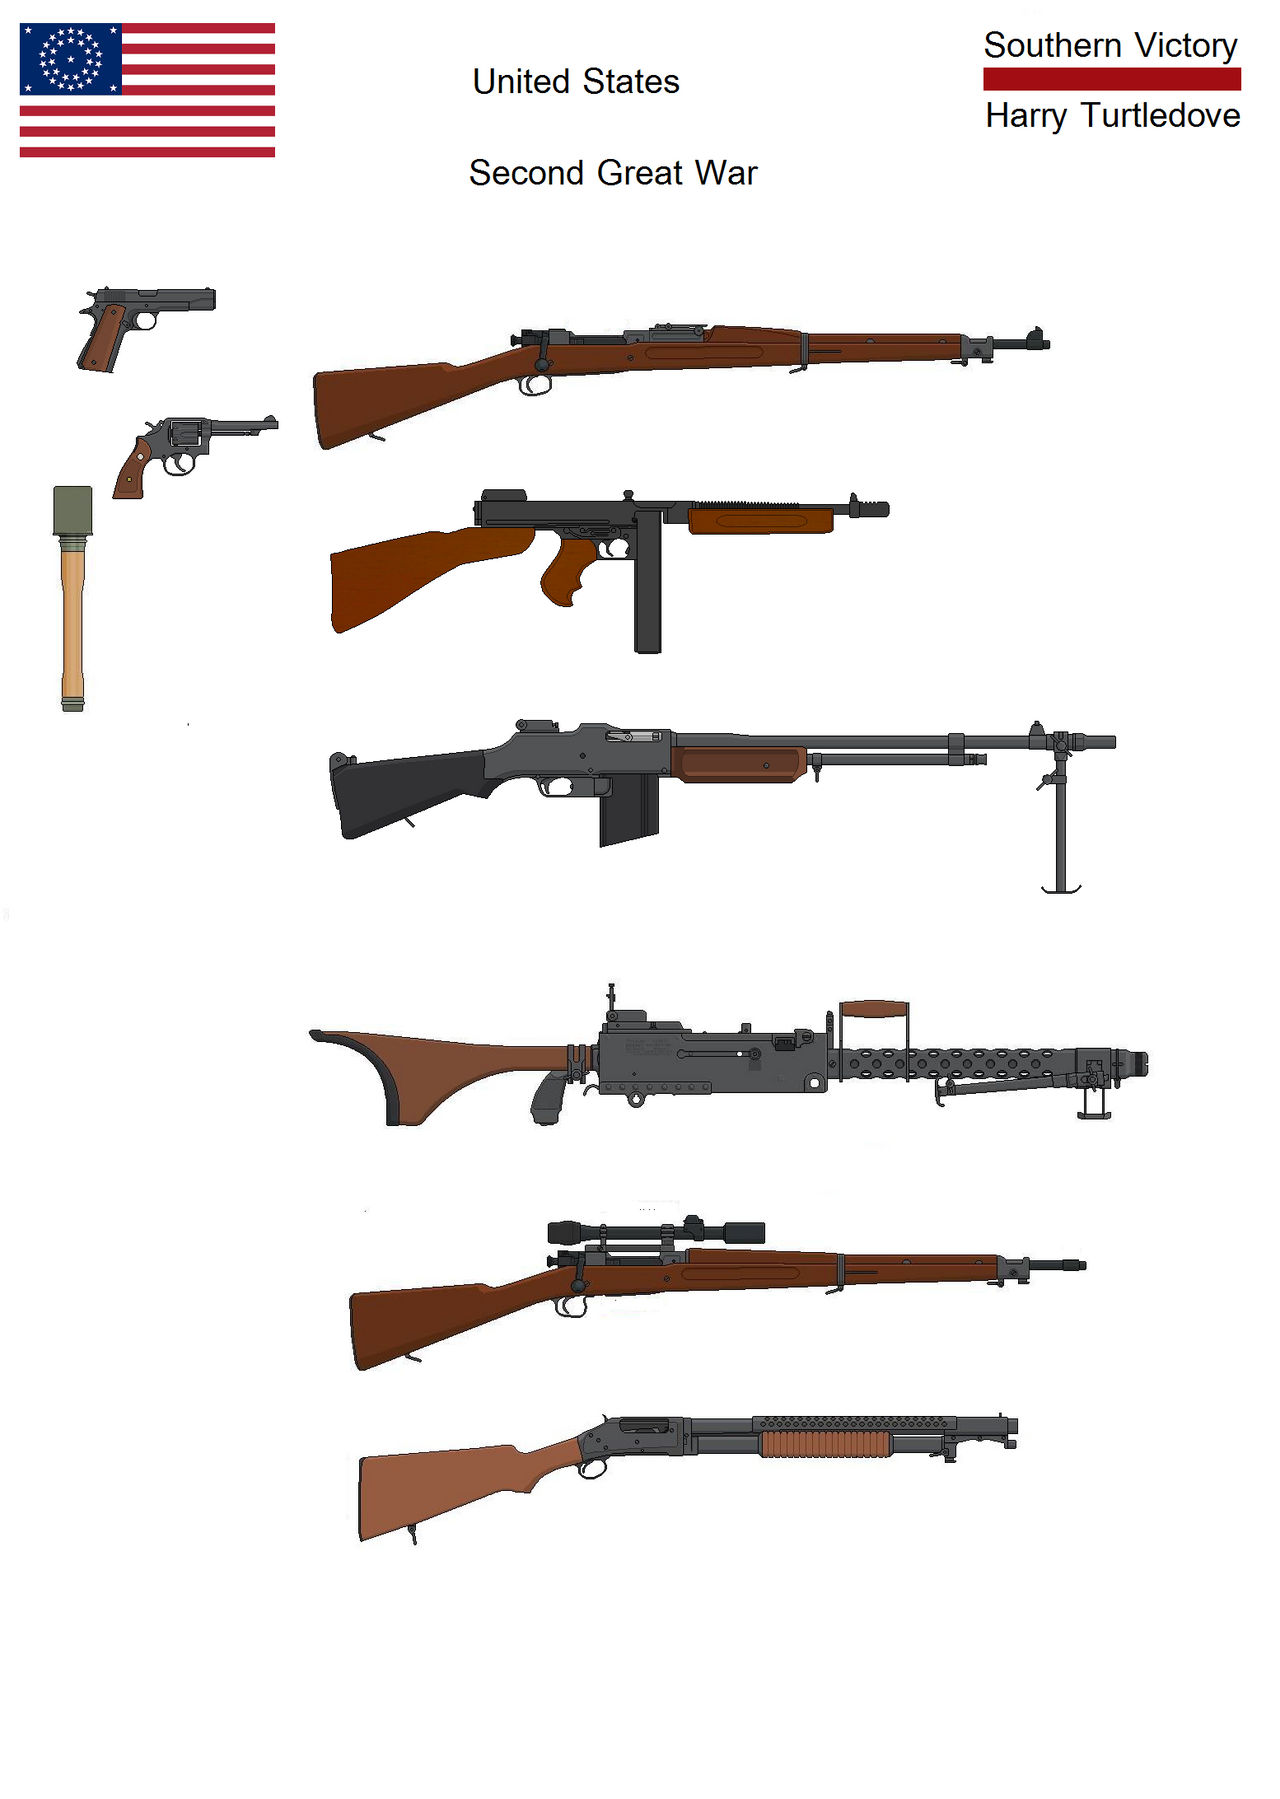 United States Army Second Great War Small Arms by Johny529440 on DeviantArt